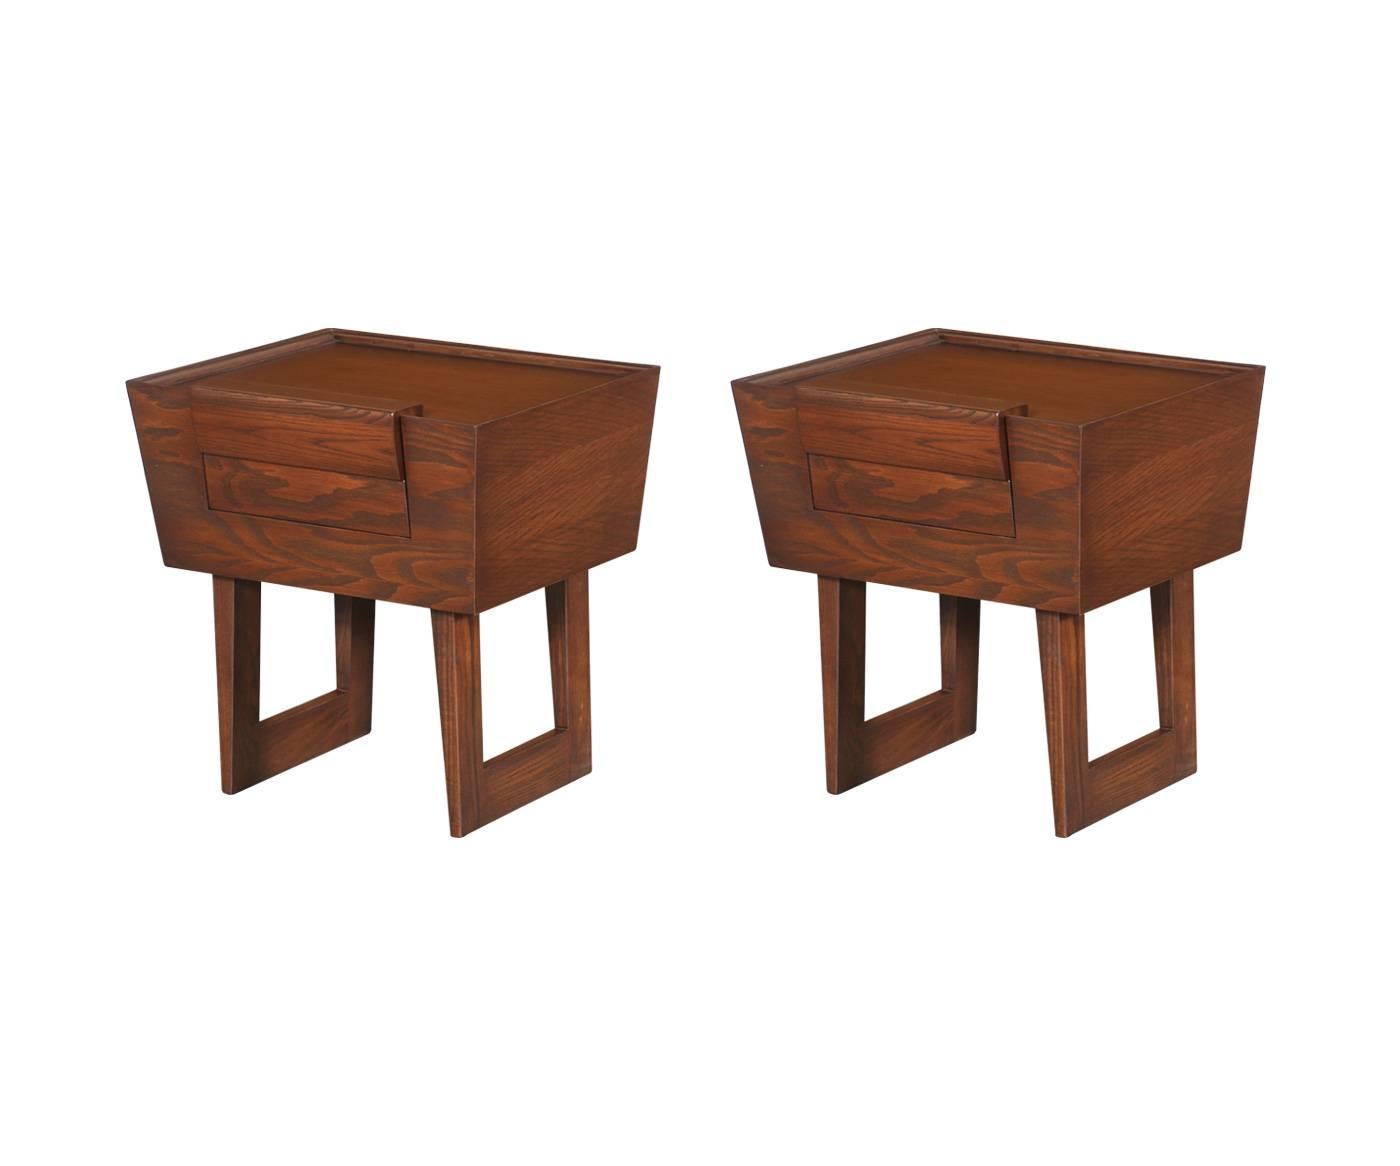 Designer: Paul Laszlo.
Manufacturer: Brown & Saltman.
Period/Style: Mid-Century Modern.
Country: United States.
Date: 1950s.

Dimensions: 22″ H x 21″ W x17″ D.
Materials: Oak stained walnut.
Condition: Excellent, newly refinished.
Number of